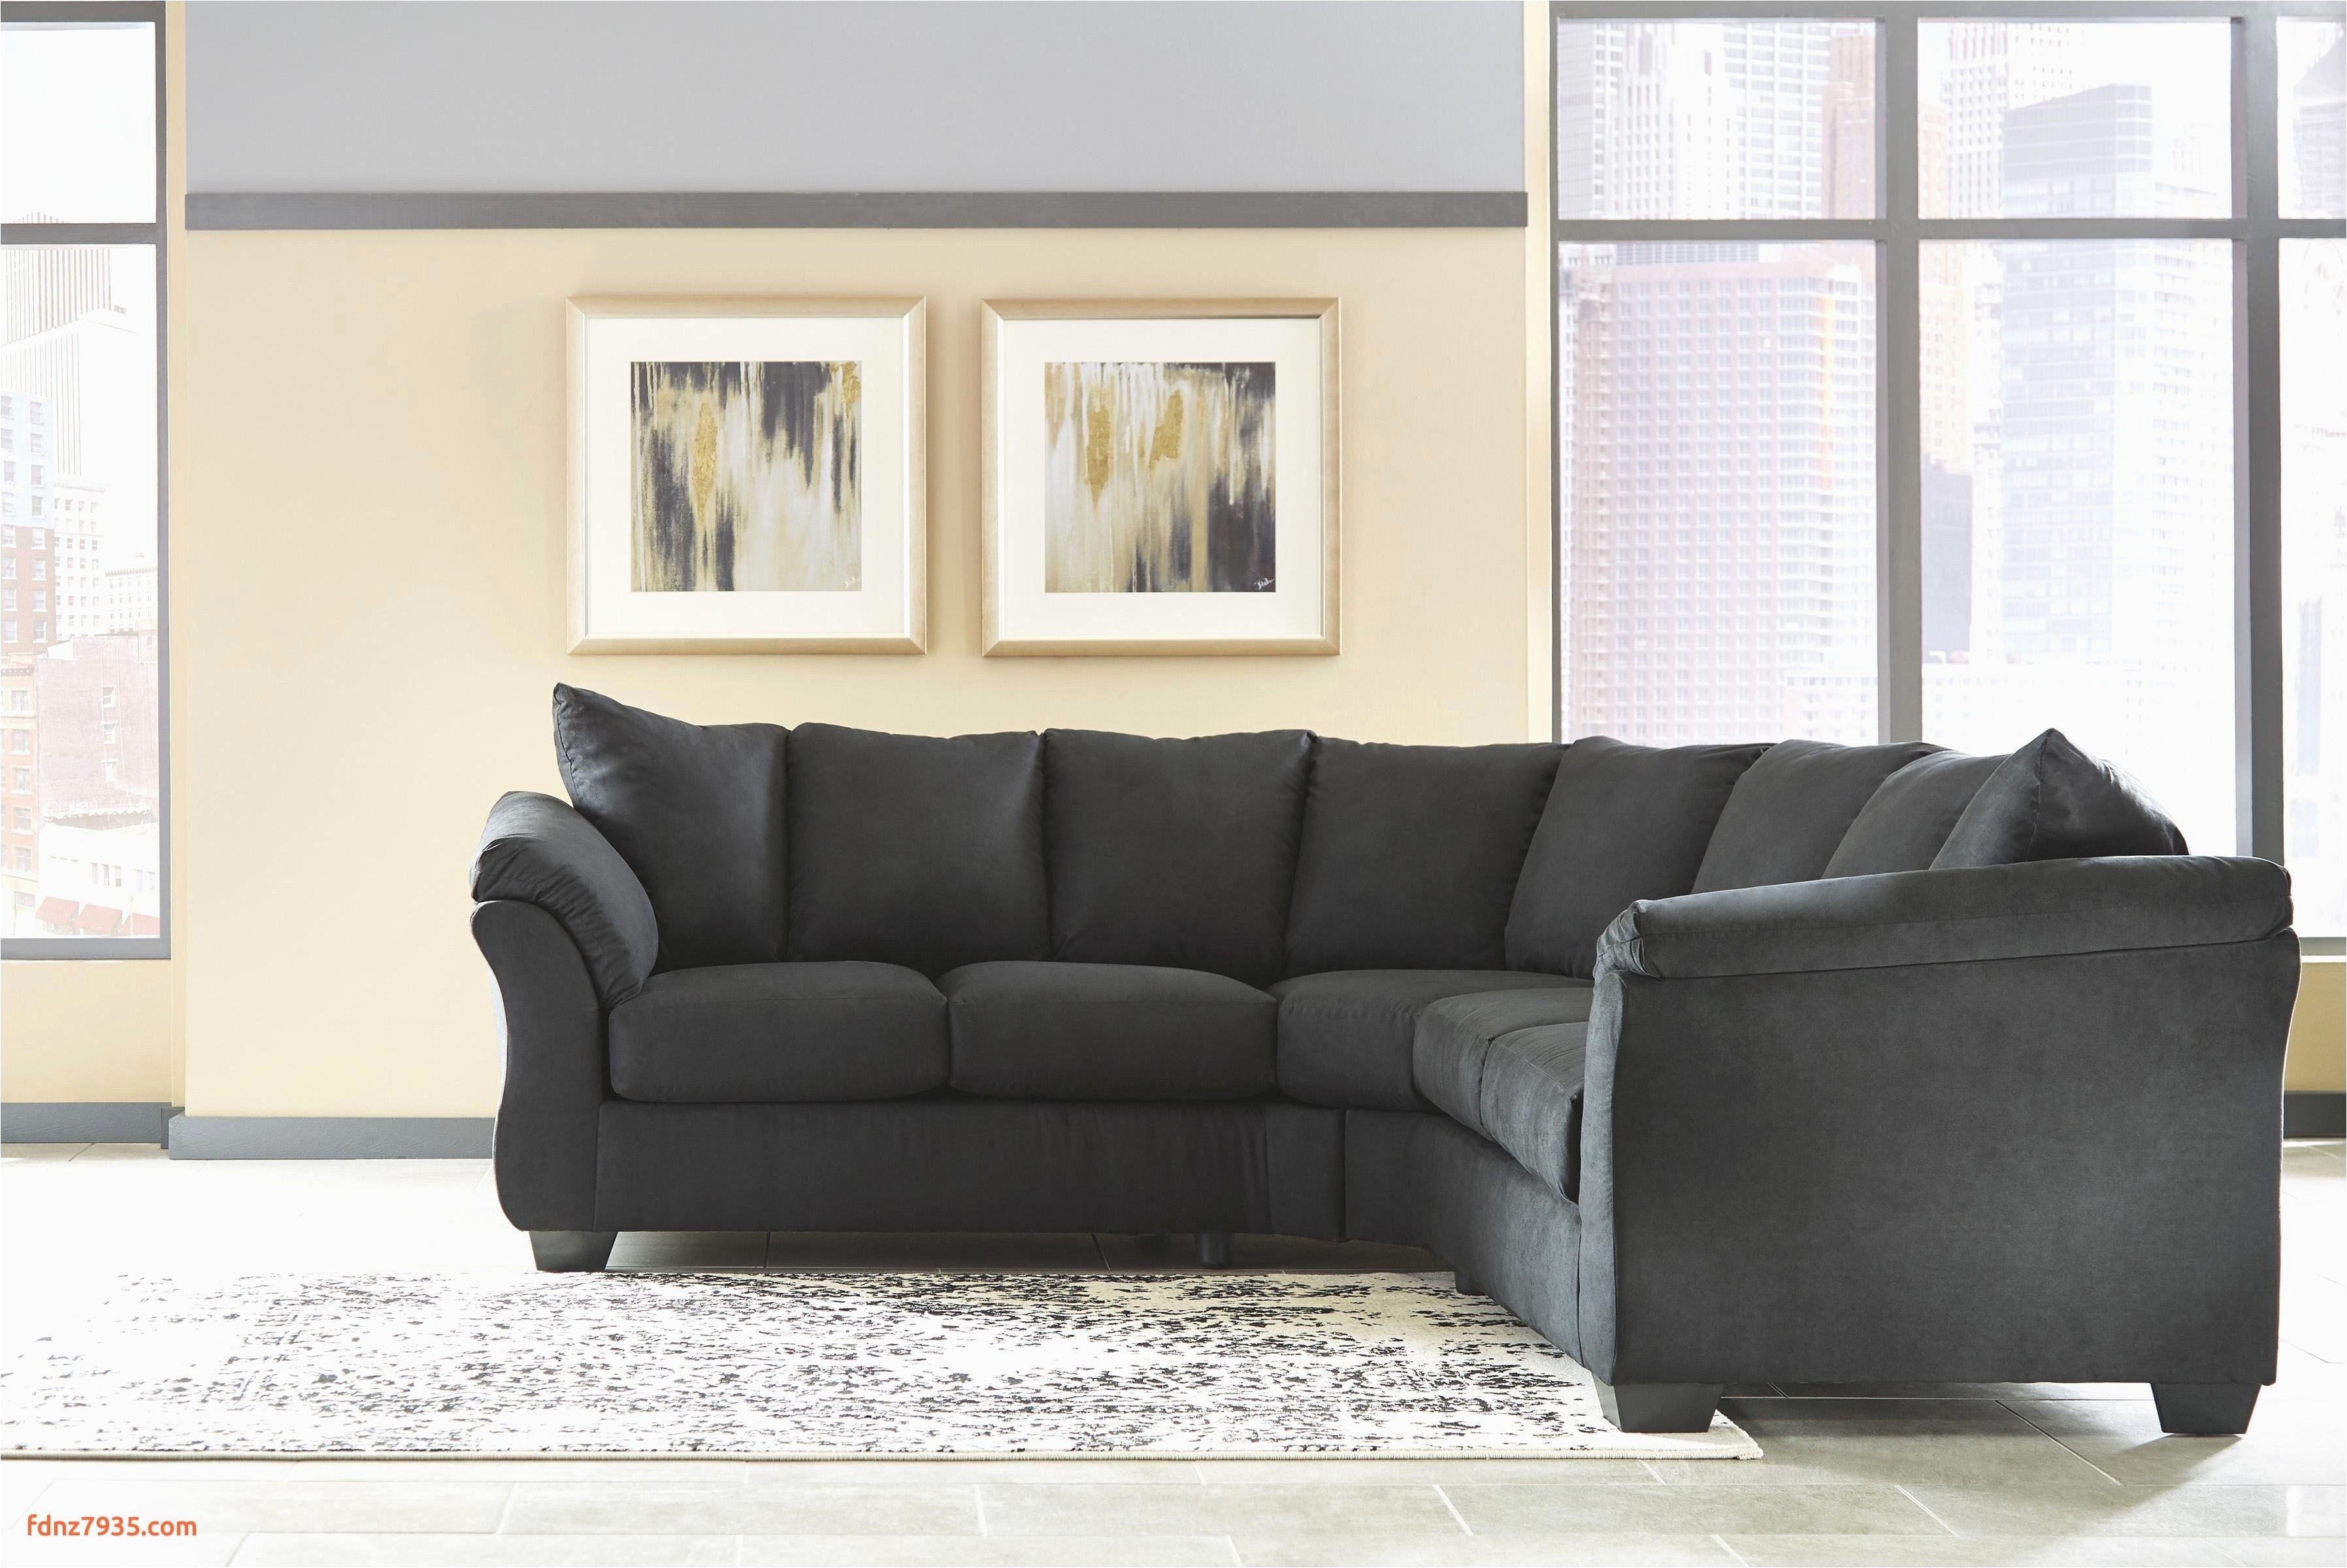 living room couches luxury living room ideas with sectional sofas luxury sectional couch 0d ashley furniture